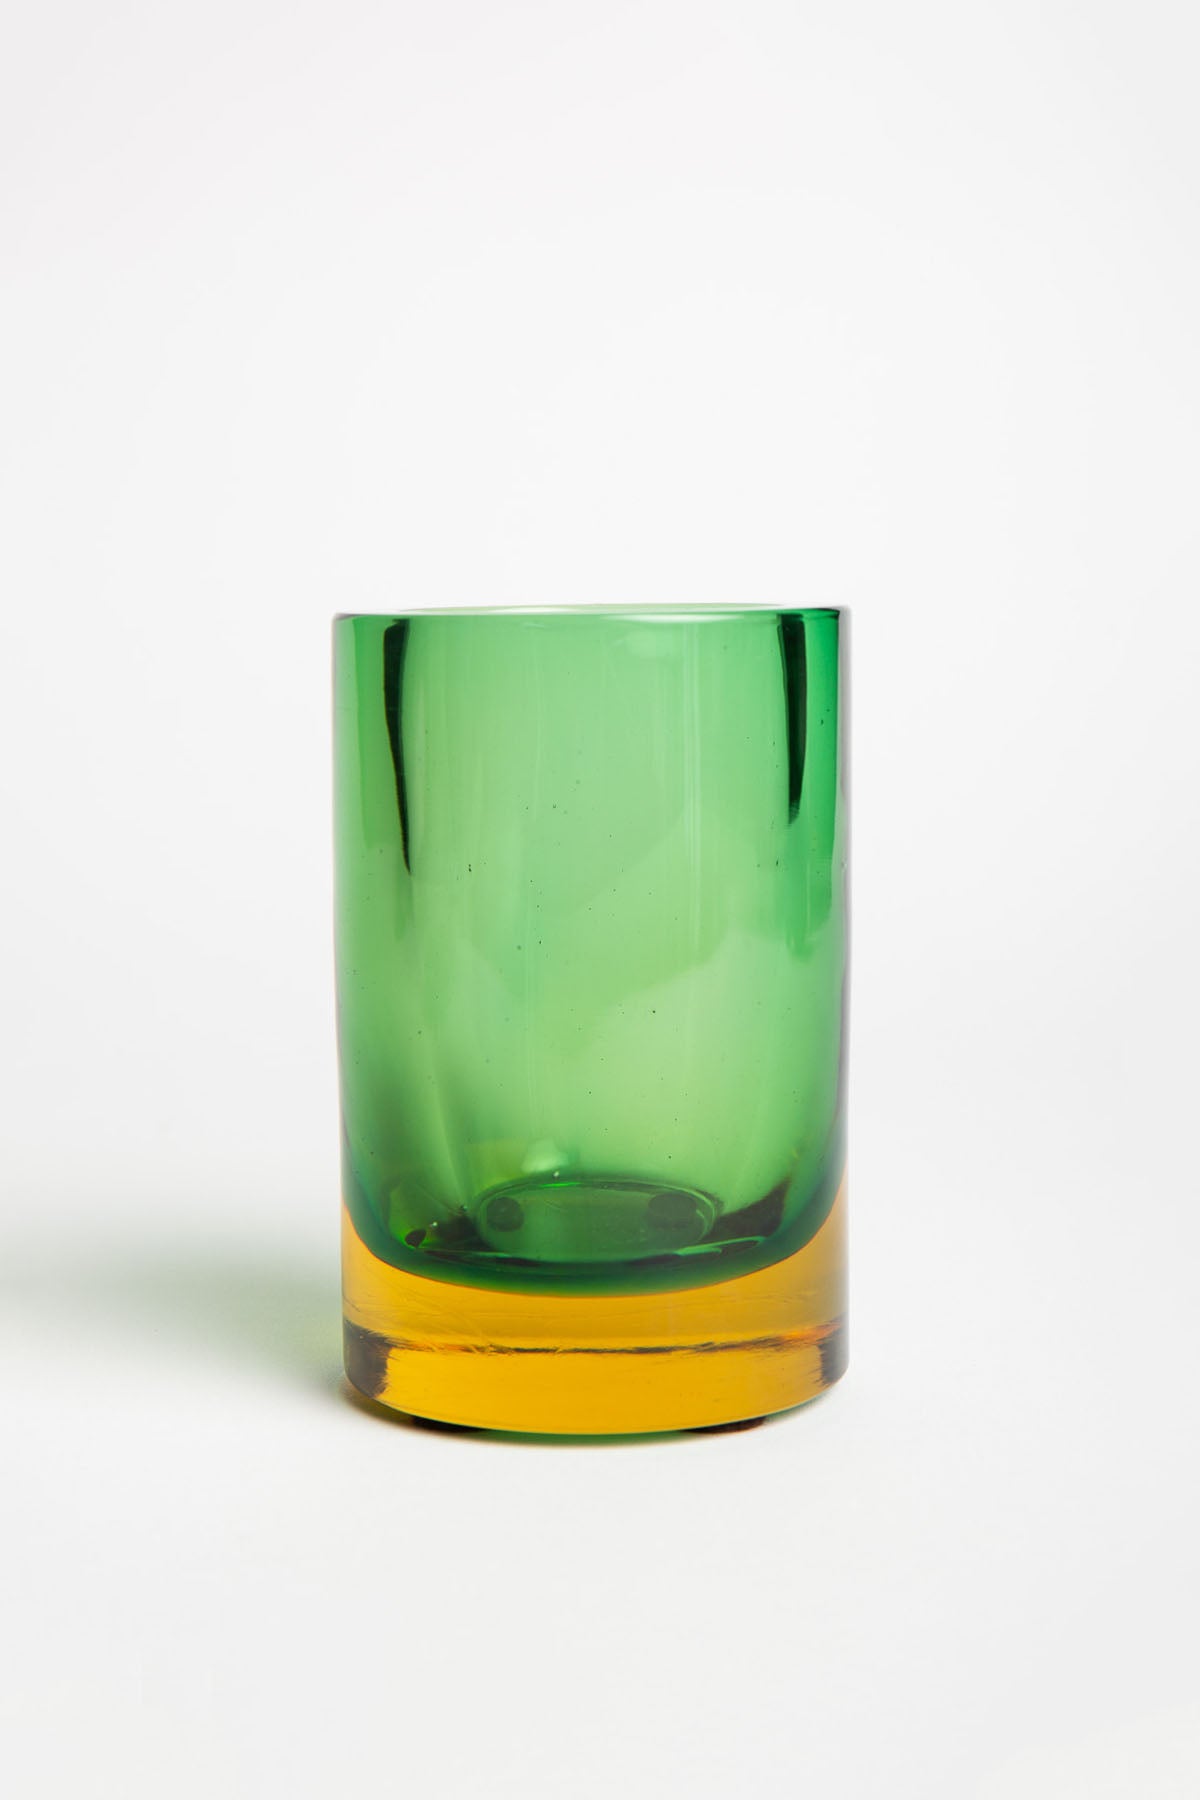 MAXFIELD PRIVATE COLLECTION | SEGUSO CYLINDRICAL VASE